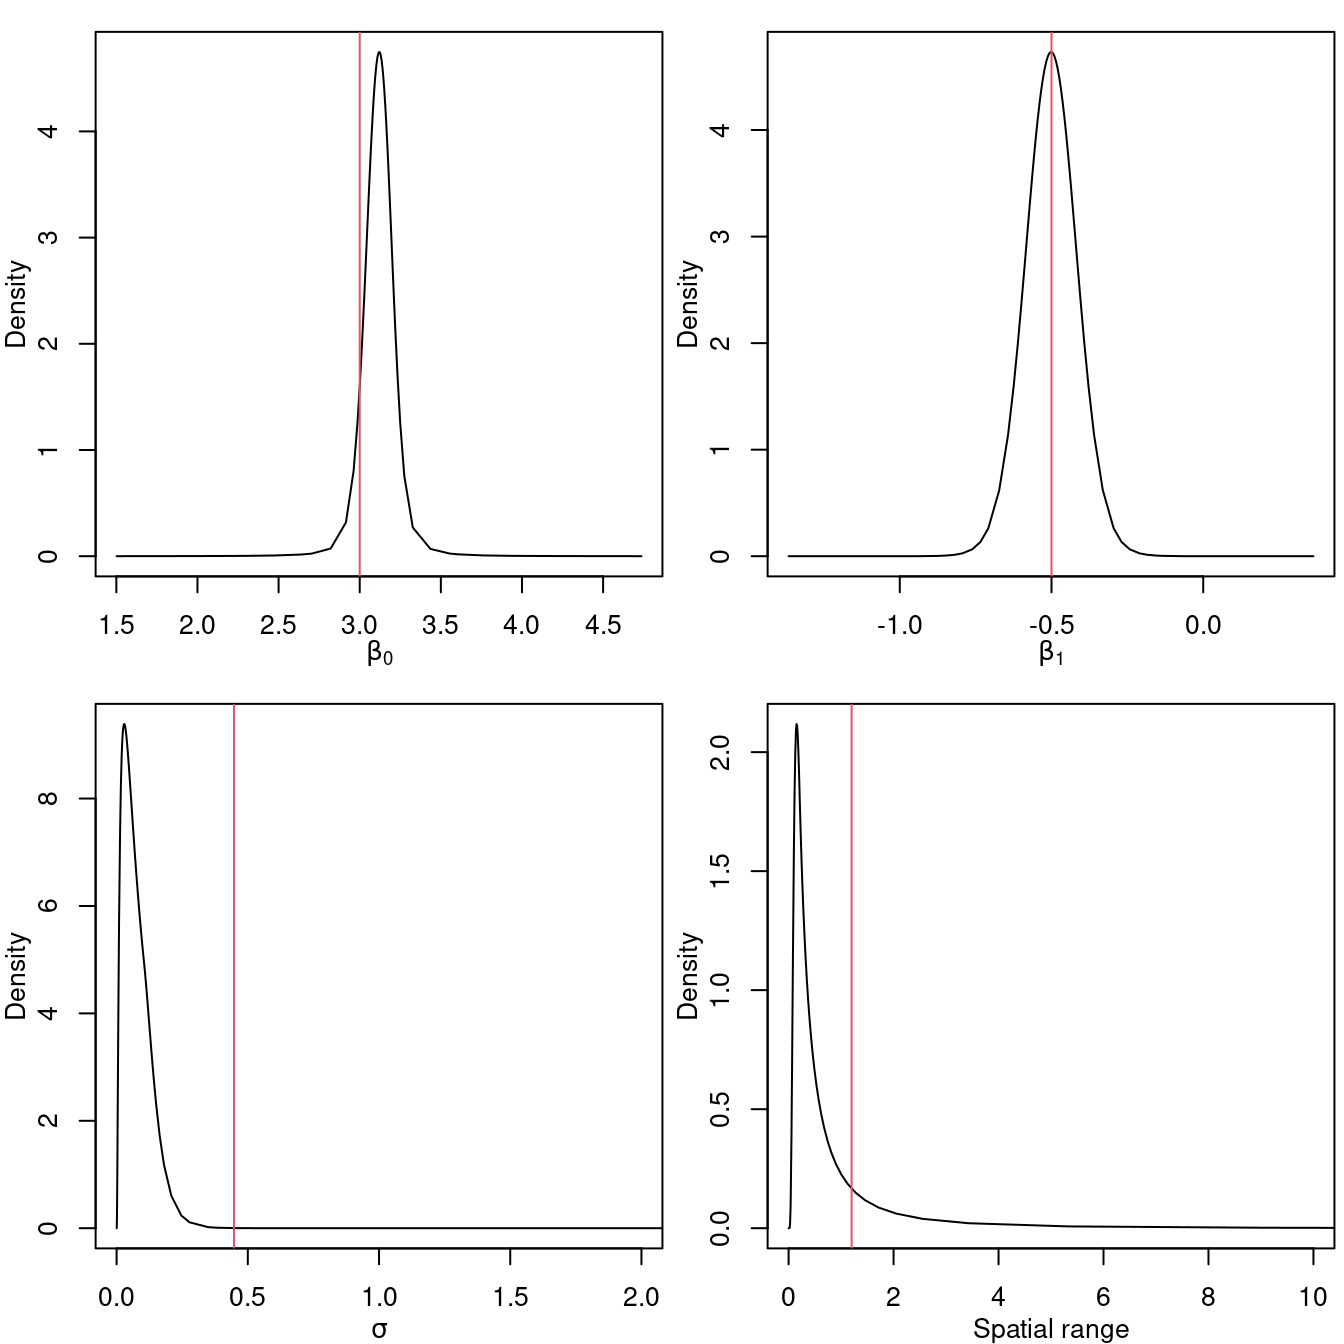 Posterior distribution for the intercept (top left), coefficient of the covariate (top right) and the parameters of the log-Cox model \(\sigma\) (bottom left) and nominal range (bottom right). Vertical lines represent the actual values of the parameters.